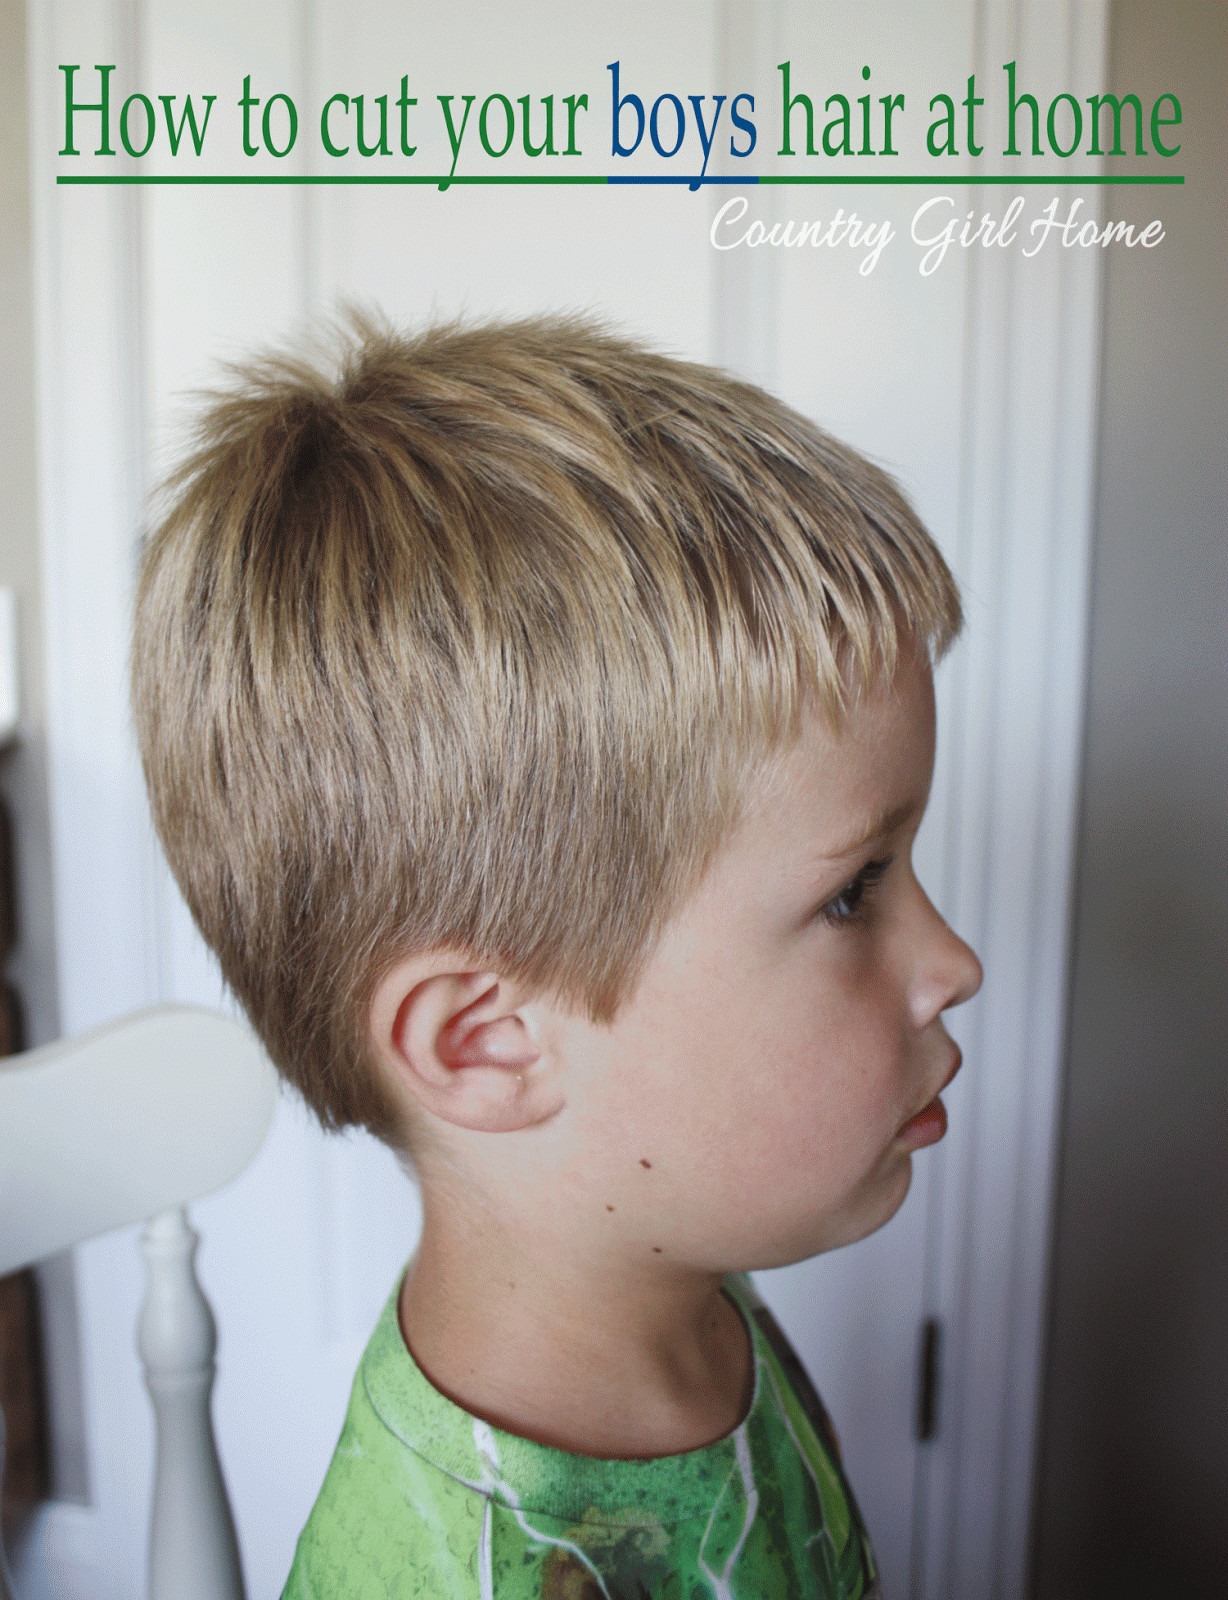 How To Cut Boys Hair With Clippers
 COUNTRY GIRL HOME How to cut your boys hair at home for